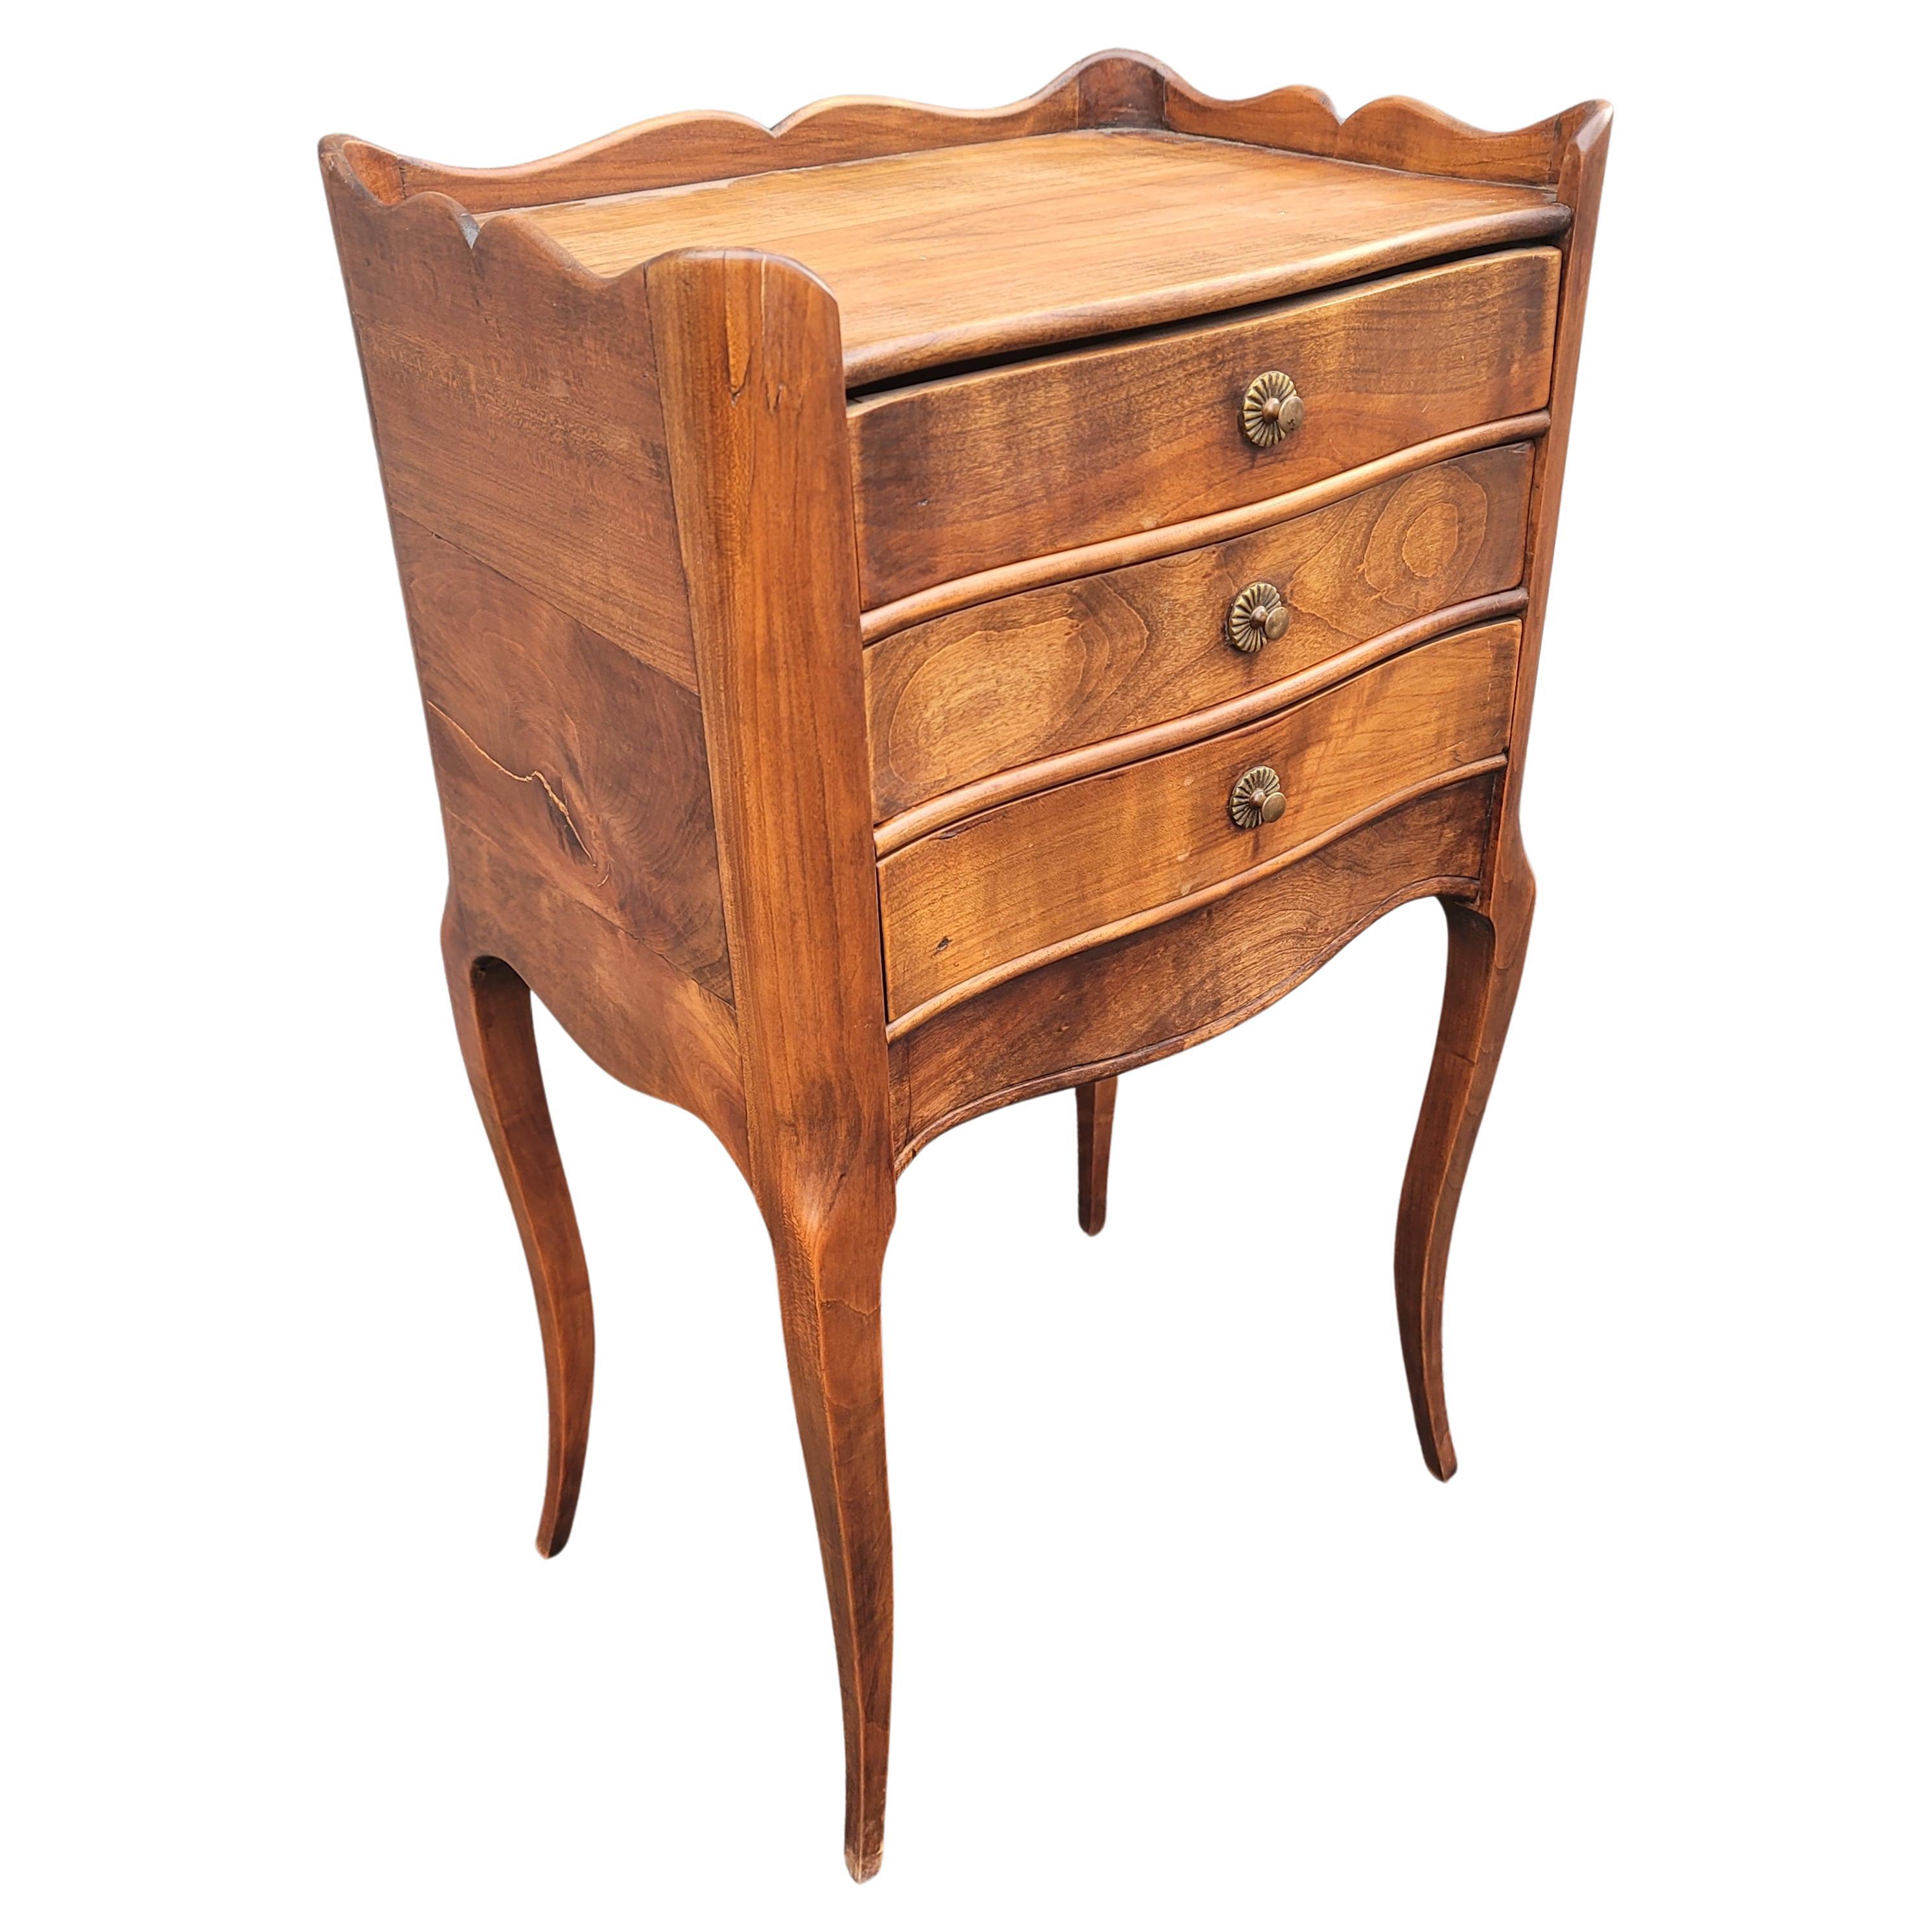 
Recently refinished 1940s French Walnut Three-Drawer Bedside Table or Nightstand
Measures 15.5